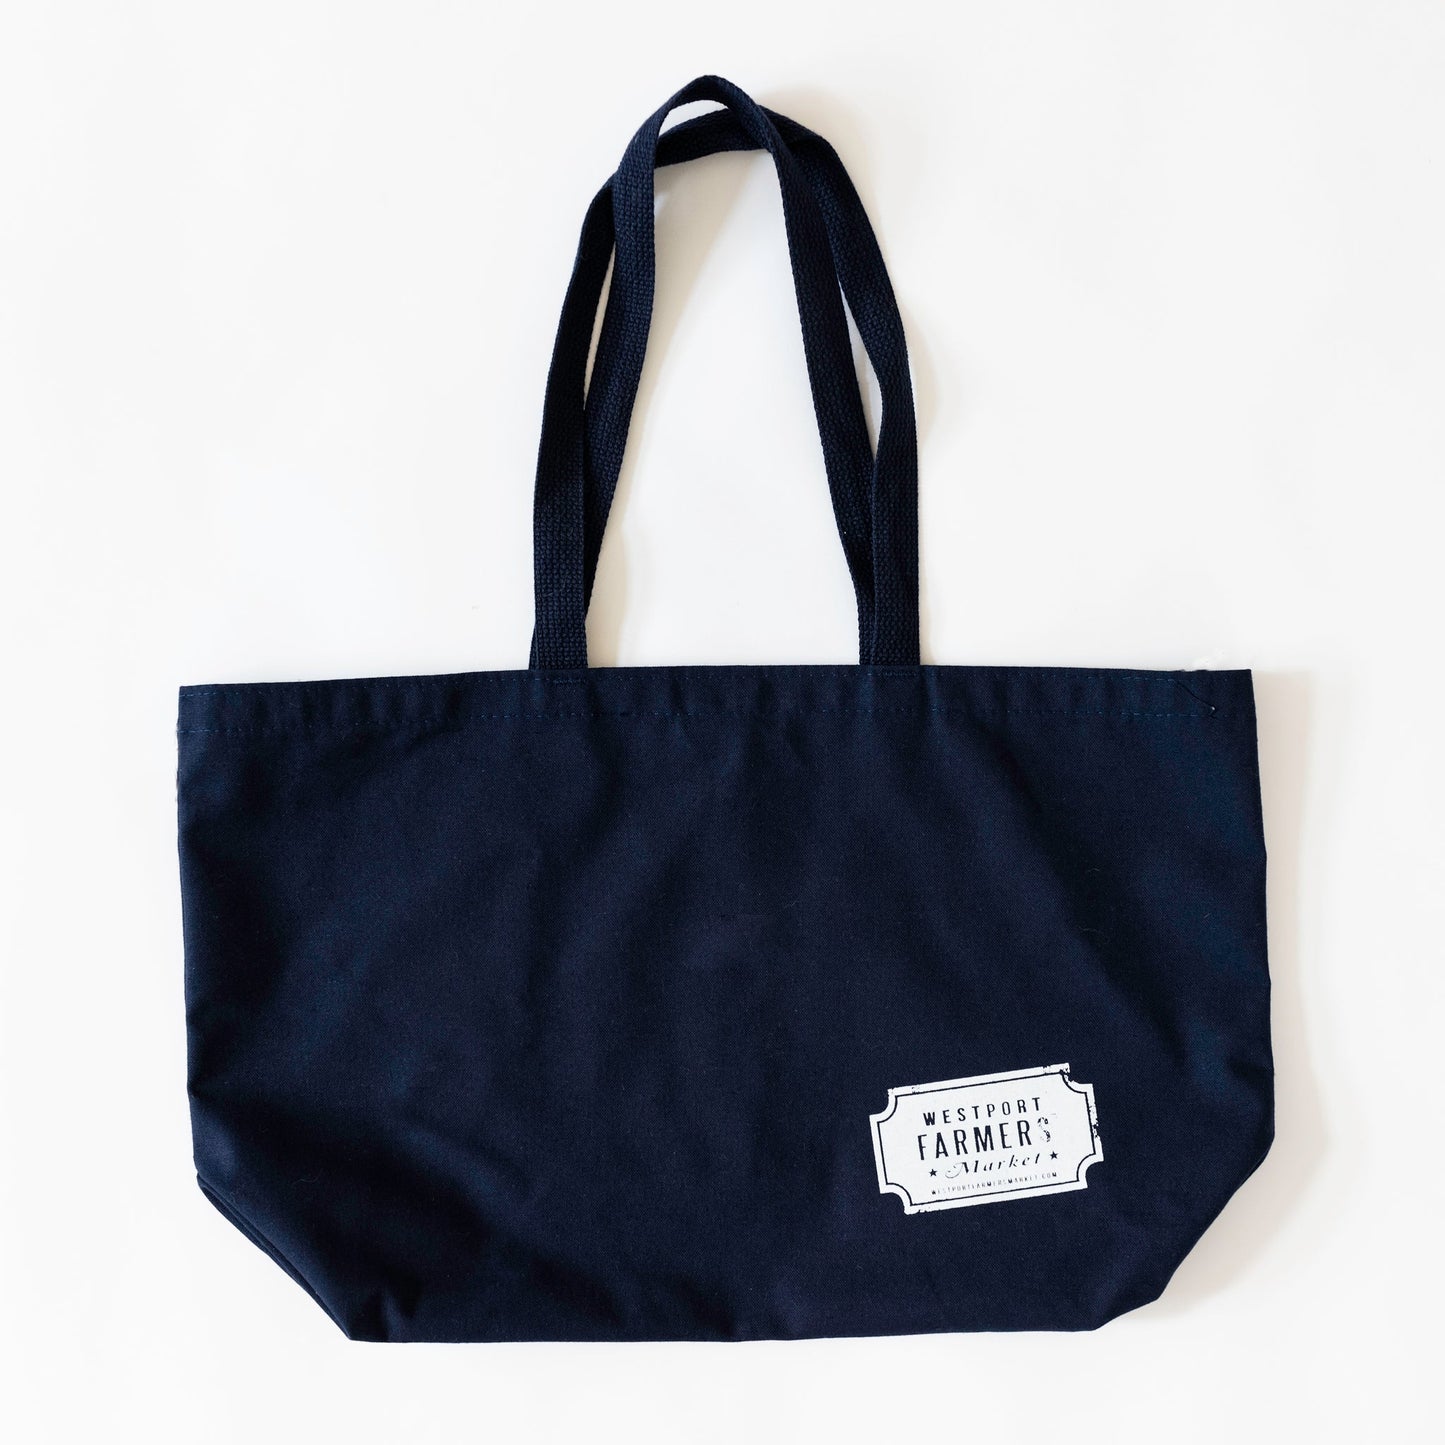 Navy tote bag back with westport farmers' market logo printed on bottom right